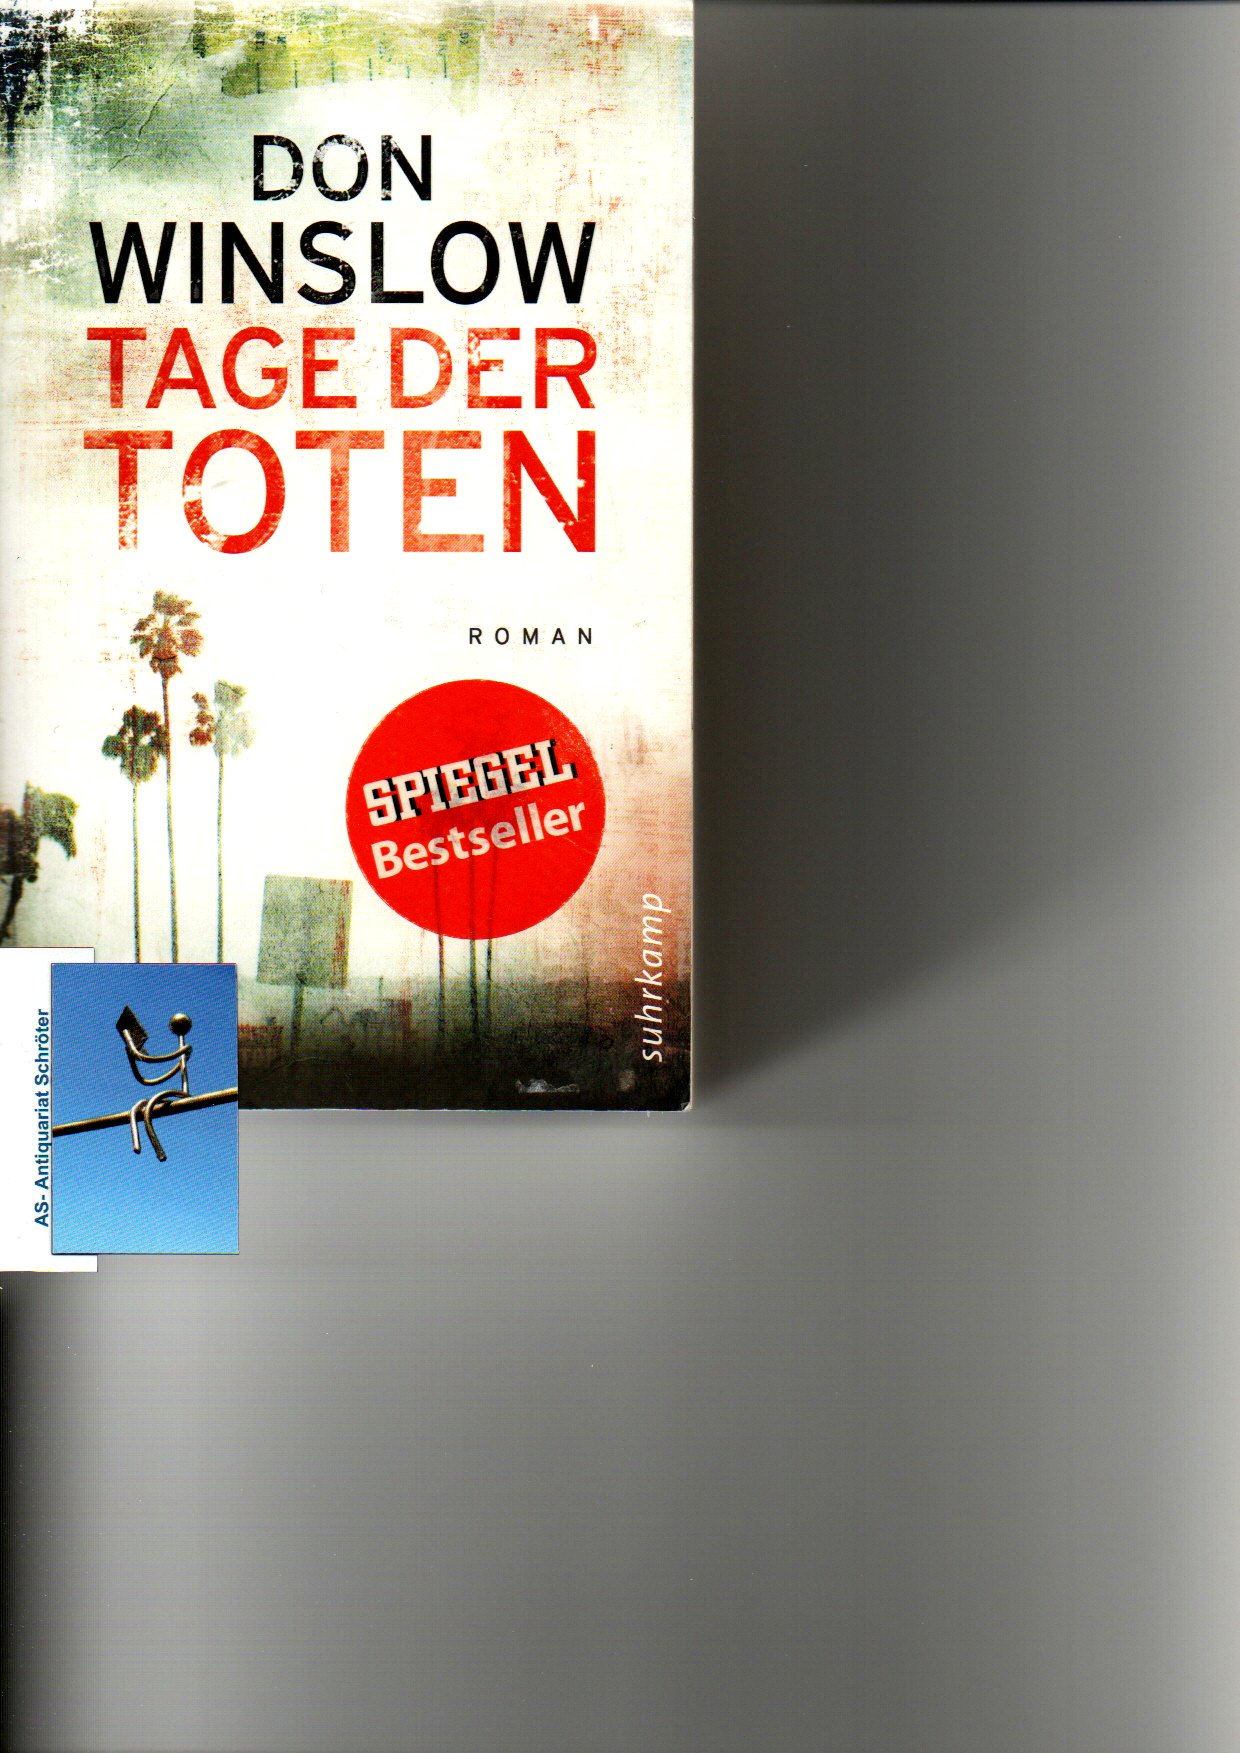 Tage der Toten. Roman. [signiert, signed). OT: The Power of the Dog. - Winslow, Don (1953)